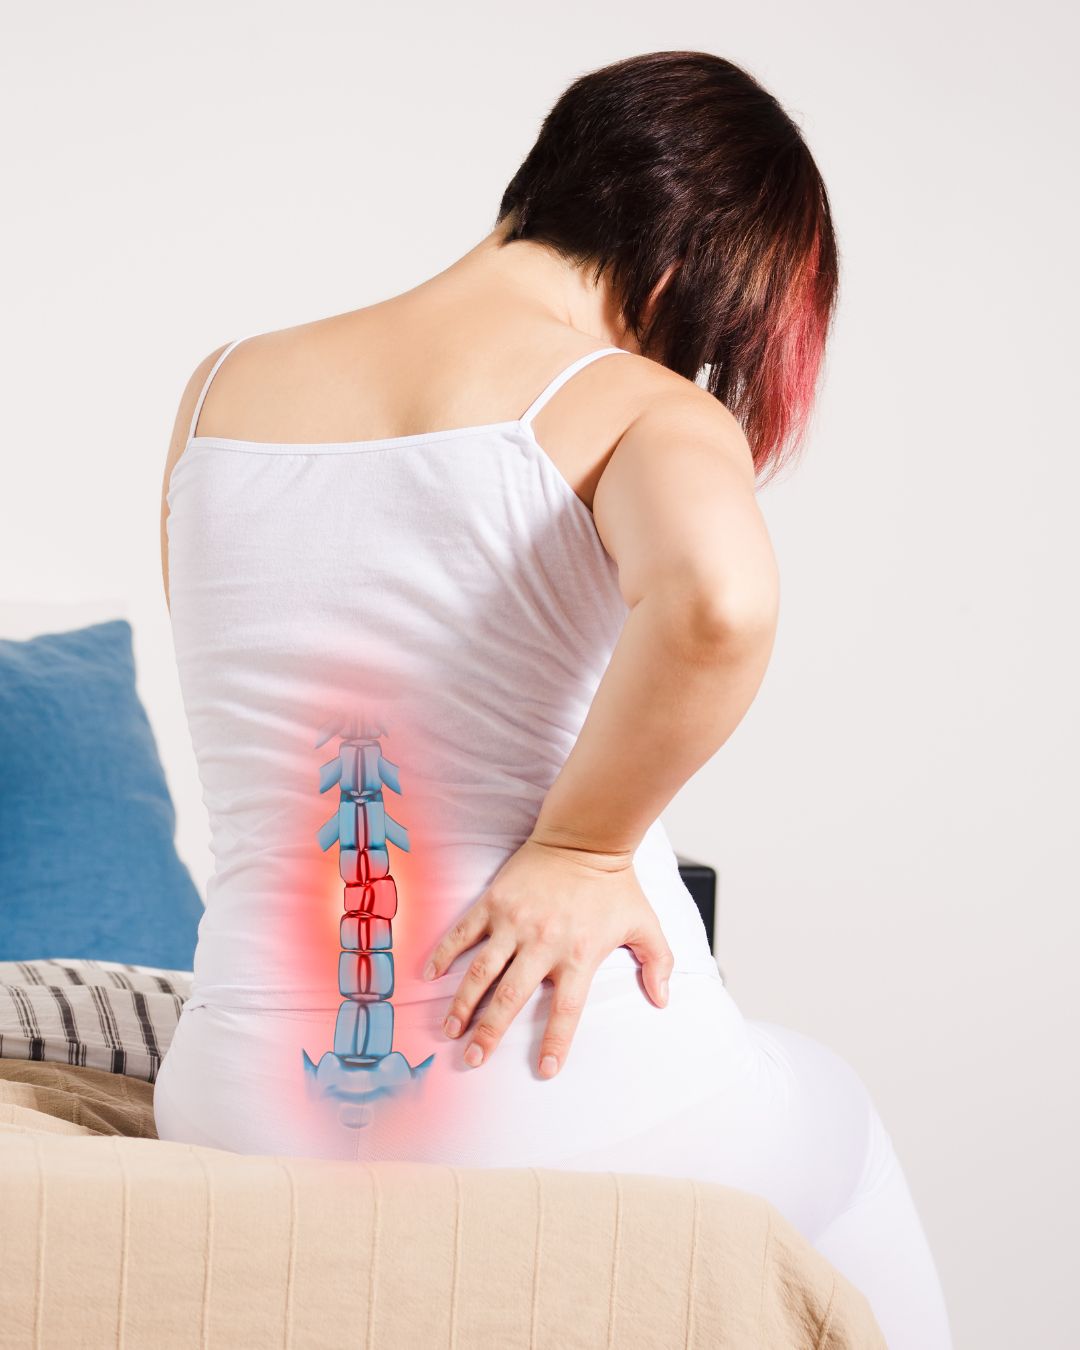 Living With Chronic Pain? Acupuncture Is A Leading Solution